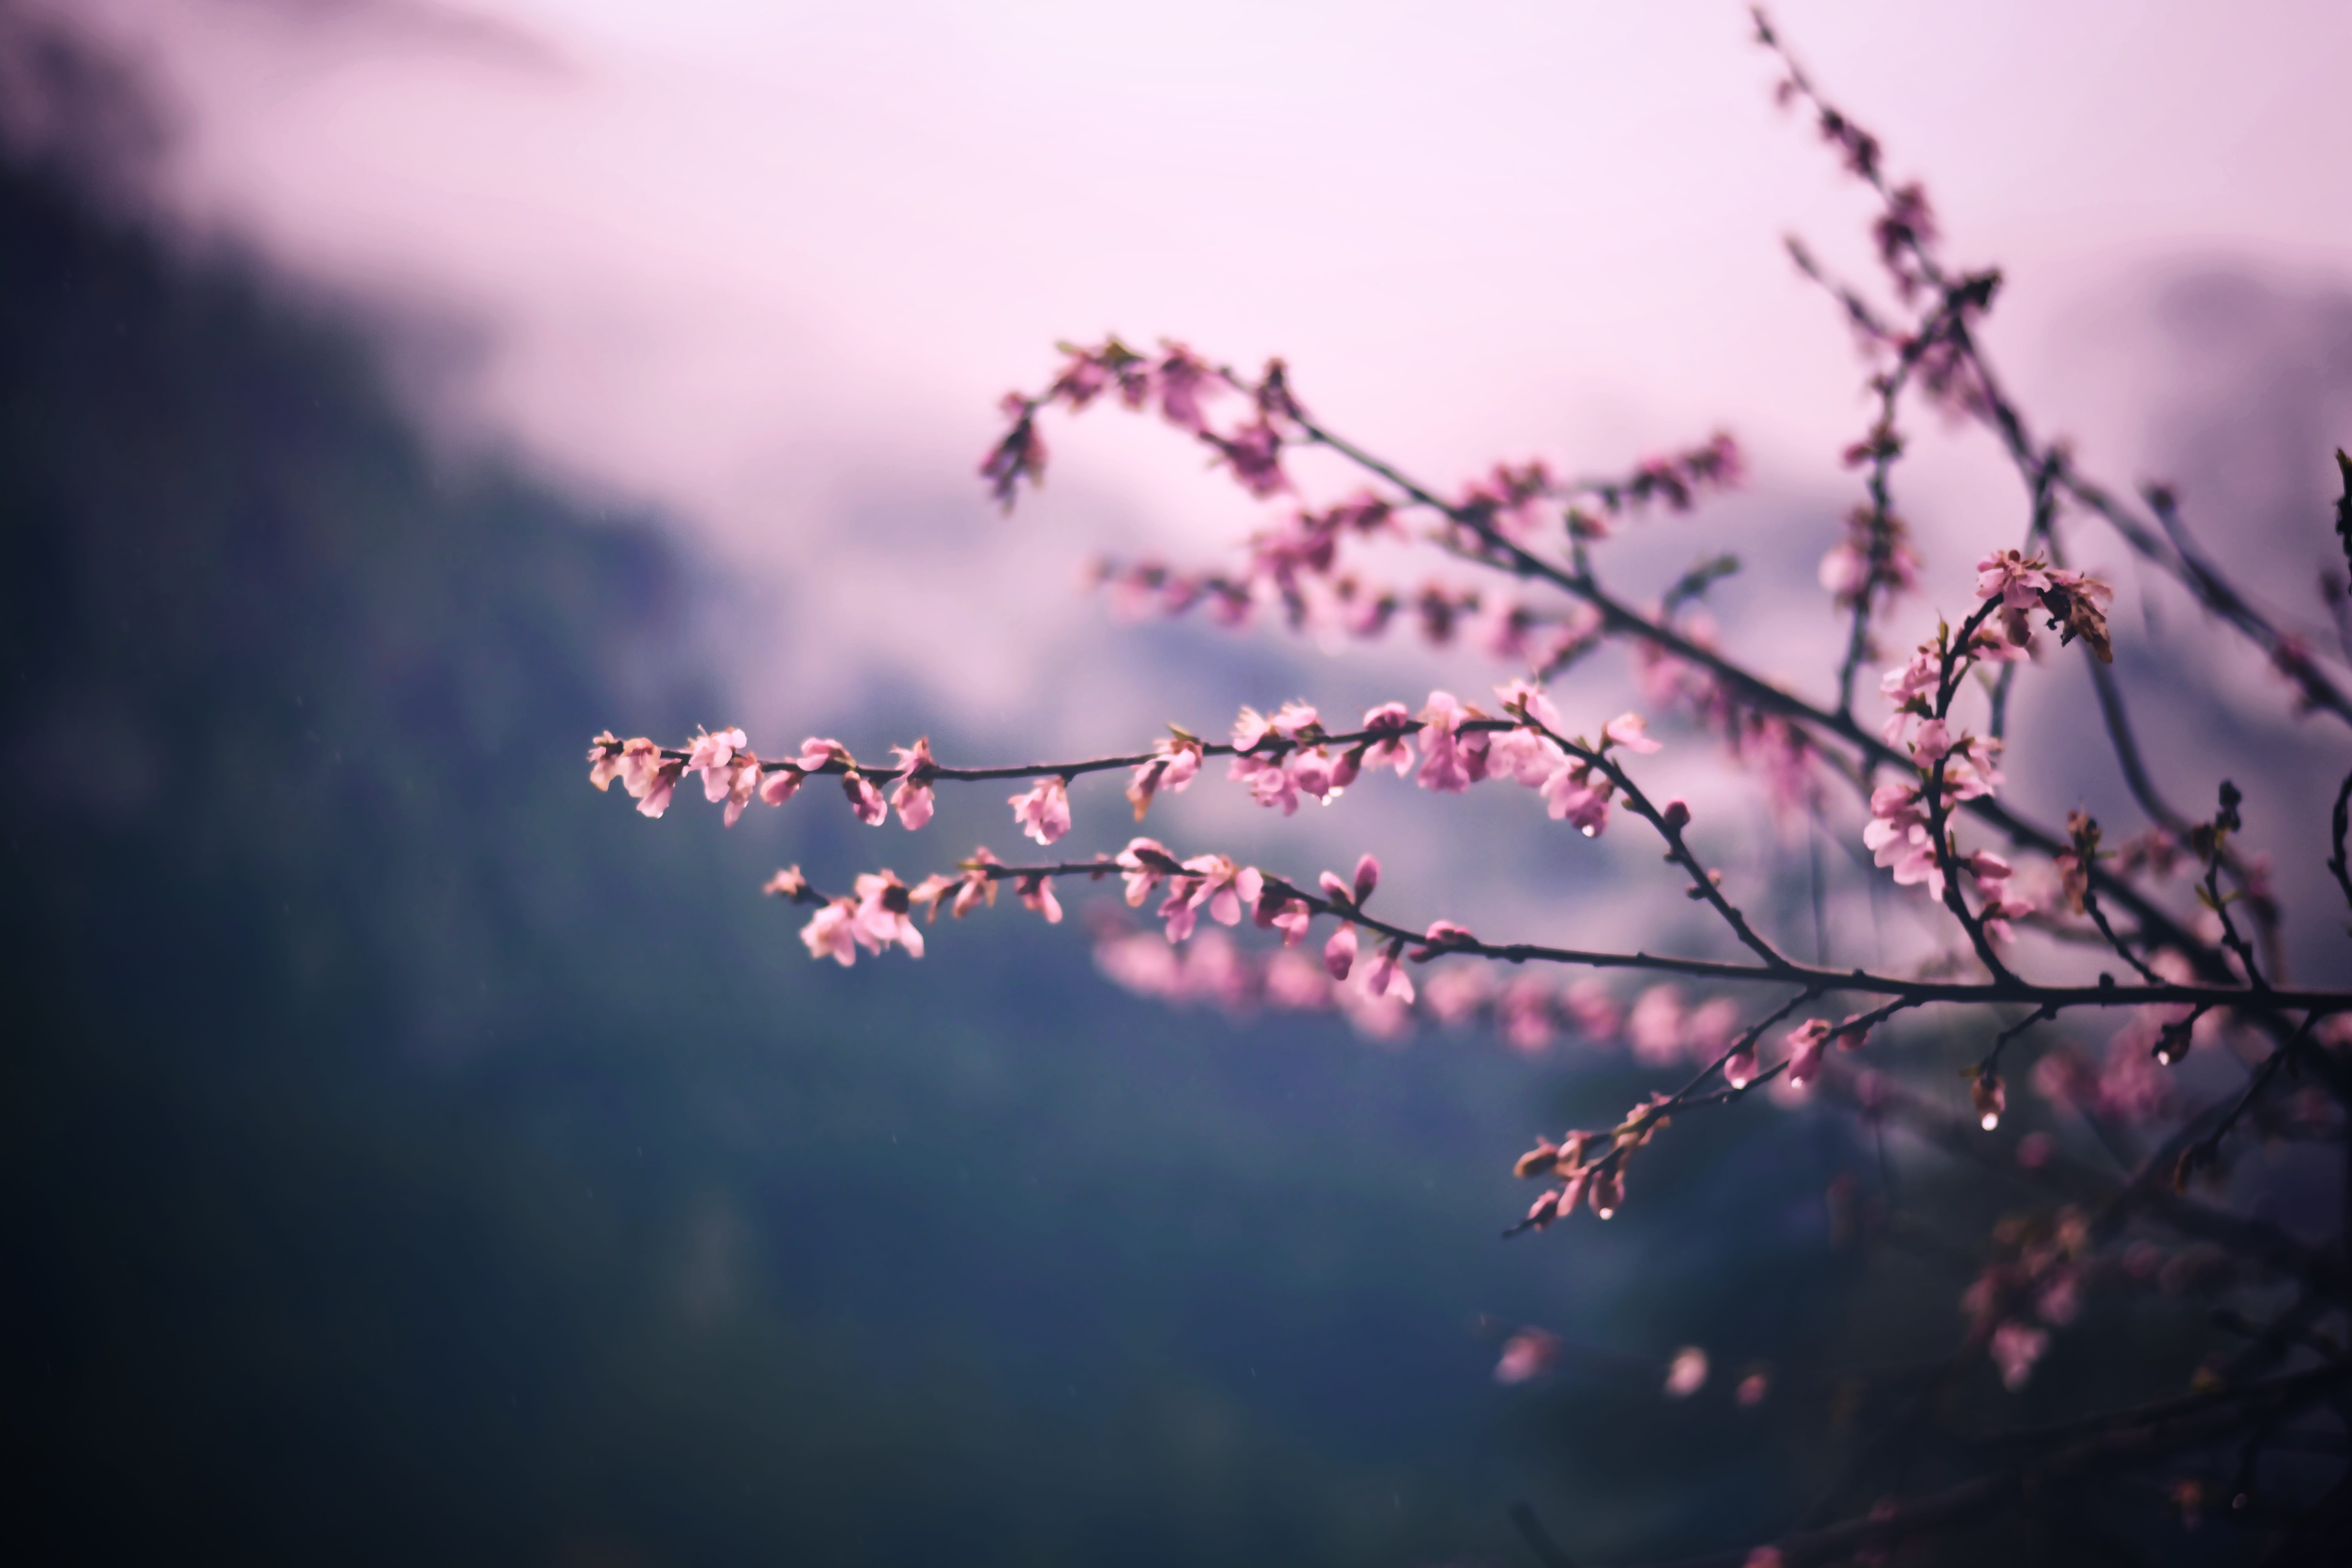 Wallpaper / nature, dew, fog, selective, blossom, photo, morning, beautiful, forest, spring, growth, photography, outdoors, pink color, environment, flower head, indium free download